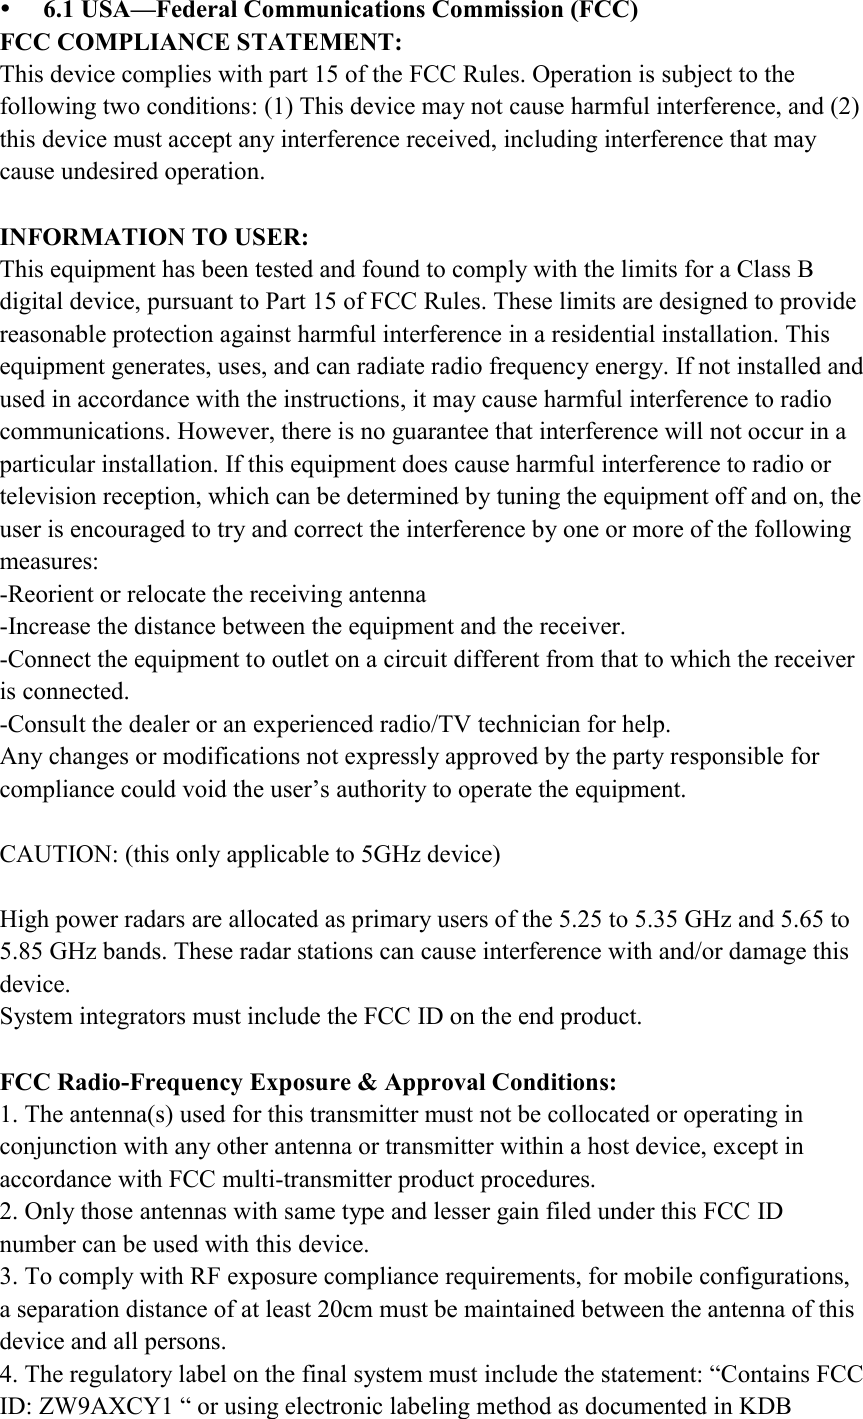  6.1 USA—Federal Communications Commission (FCC) FCC COMPLIANCE STATEMENT: This device complies with part 15 of the FCC Rules. Operation is subject to the following two conditions: (1) This device may not cause harmful interference, and (2) this device must accept any interference received, including interference that may cause undesired operation.  INFORMATION TO USER: This equipment has been tested and found to comply with the limits for a Class B digital device, pursuant to Part 15 of FCC Rules. These limits are designed to provide reasonable protection against harmful interference in a residential installation. This equipment generates, uses, and can radiate radio frequency energy. If not installed and used in accordance with the instructions, it may cause harmful interference to radio communications. However, there is no guarantee that interference will not occur in a particular installation. If this equipment does cause harmful interference to radio or television reception, which can be determined by tuning the equipment off and on, the user is encouraged to try and correct the interference by one or more of the following measures: -Reorient or relocate the receiving antenna -Increase the distance between the equipment and the receiver. -Connect the equipment to outlet on a circuit different from that to which the receiver is connected. -Consult the dealer or an experienced radio/TV technician for help. Any changes or modifications not expressly approved by the party responsible for compliance could void the user’s authority to operate the equipment.  CAUTION: (this only applicable to 5GHz device)  High power radars are allocated as primary users of the 5.25 to 5.35 GHz and 5.65 to 5.85 GHz bands. These radar stations can cause interference with and/or damage this device. System integrators must include the FCC ID on the end product.  FCC Radio-Frequency Exposure &amp; Approval Conditions: 1. The antenna(s) used for this transmitter must not be collocated or operating in conjunction with any other antenna or transmitter within a host device, except in accordance with FCC multi-transmitter product procedures. 2. Only those antennas with same type and lesser gain filed under this FCC ID number can be used with this device. 3. To comply with RF exposure compliance requirements, for mobile configurations, a separation distance of at least 20cm must be maintained between the antenna of this device and all persons. 4. The regulatory label on the final system must include the statement: “Contains FCC ID: ZW9AXCY1 “ or using electronic labeling method as documented in KDB 